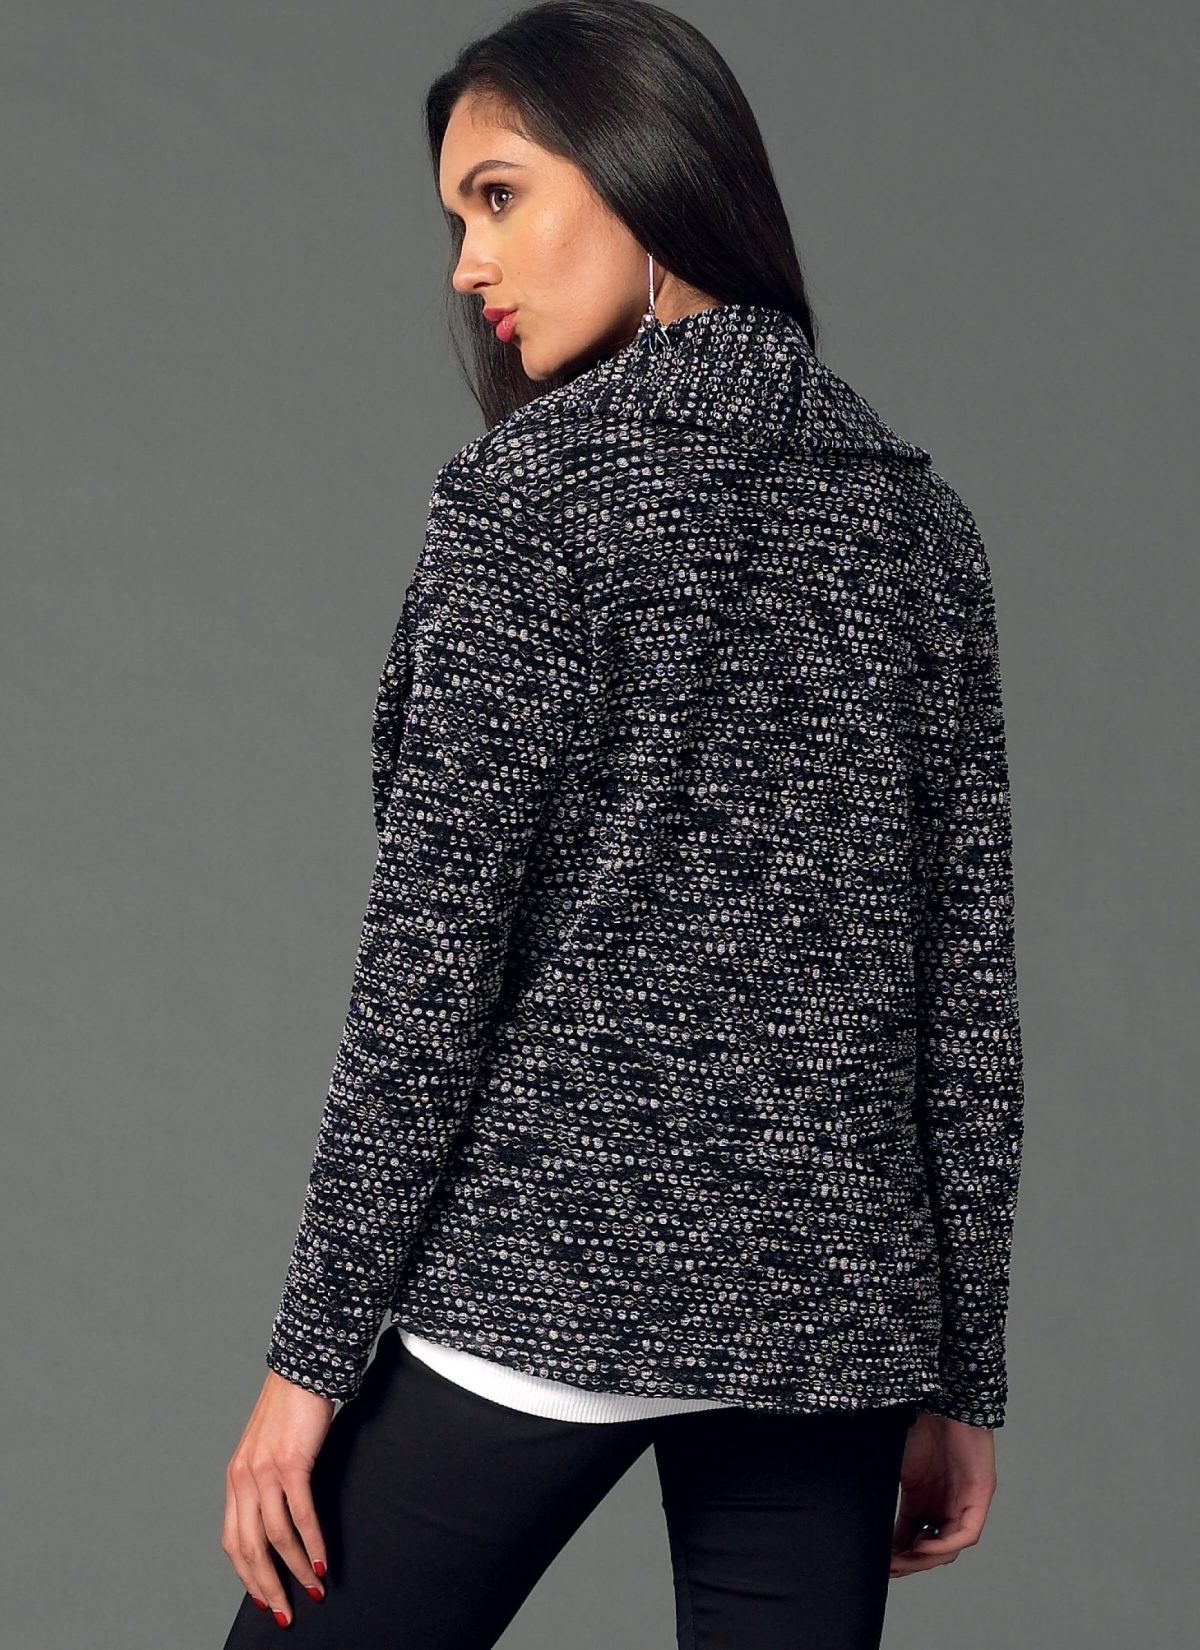 McCall's Sewing Pattern M7254 Misses' Cardigans